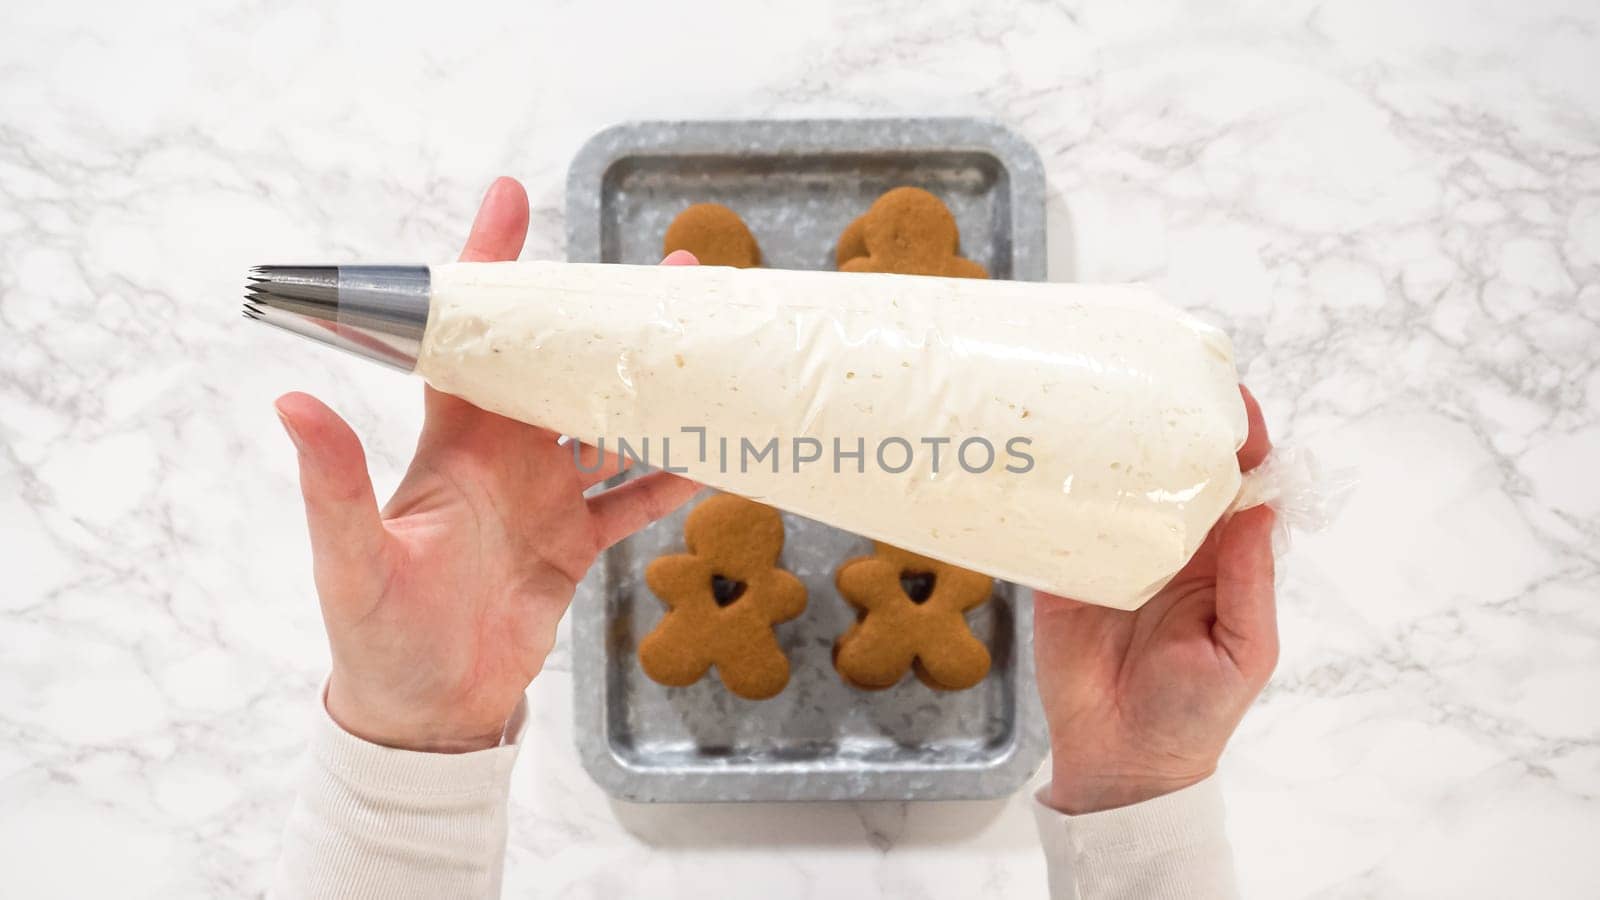 Flat lay. Gingerbread cookies await their second halves on a marble surface, each meticulously piped with buttercream to craft delightful sandwich treats. The precision of the piping adds a festive touch.